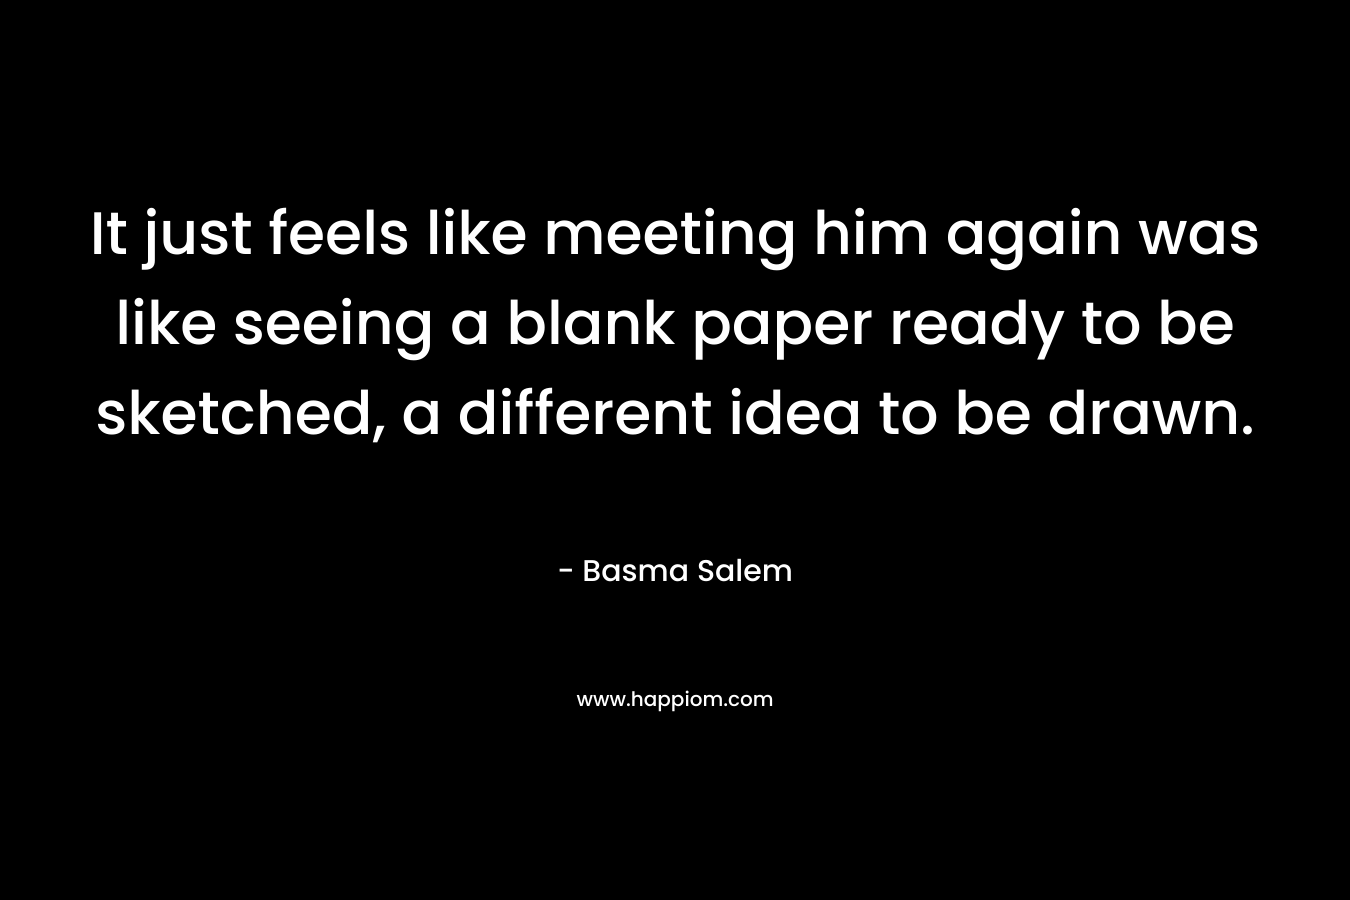 It just feels like meeting him again was like seeing a blank paper ready to be sketched, a different idea to be drawn. – Basma Salem